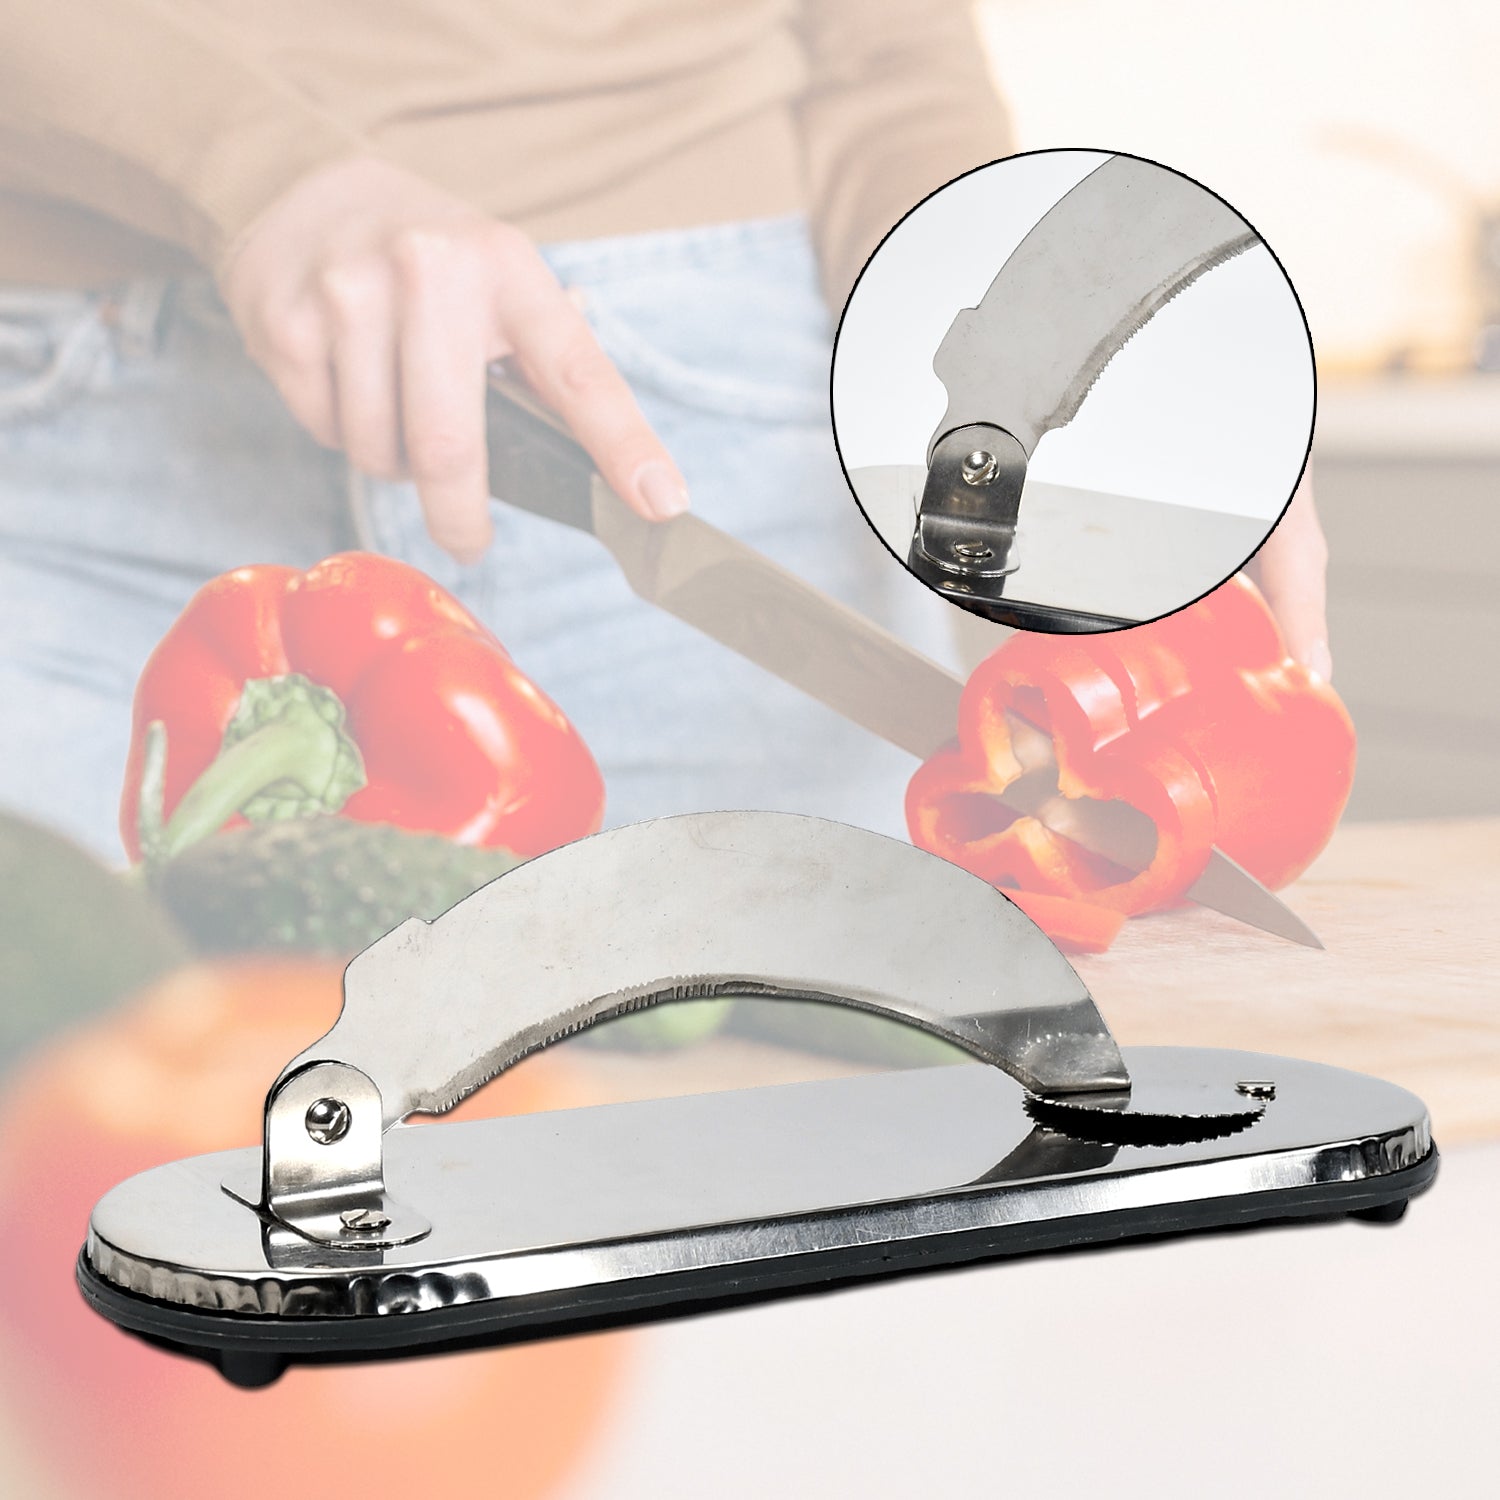 2841 Steel Vegetable Cutter Premium Quality Cutter For Fruit , Vegetable & Meat Cutting Use DeoDap